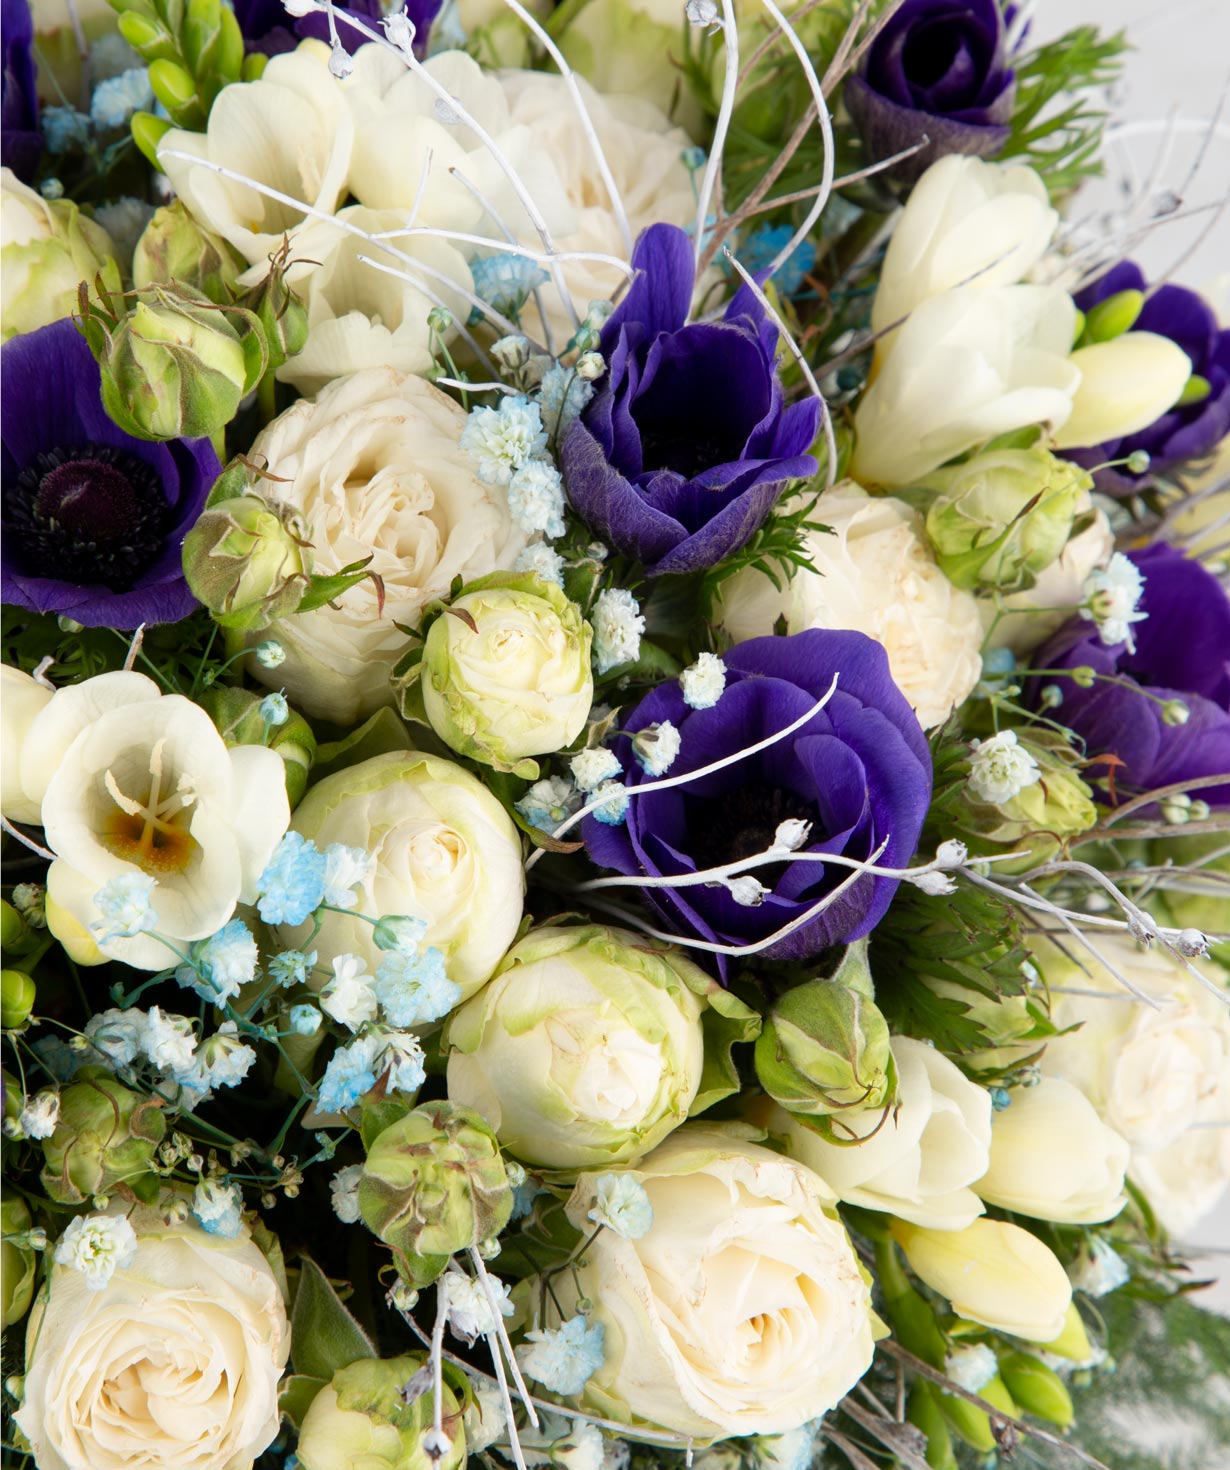 Arrangement `Achinsk` with spray roses and freesias